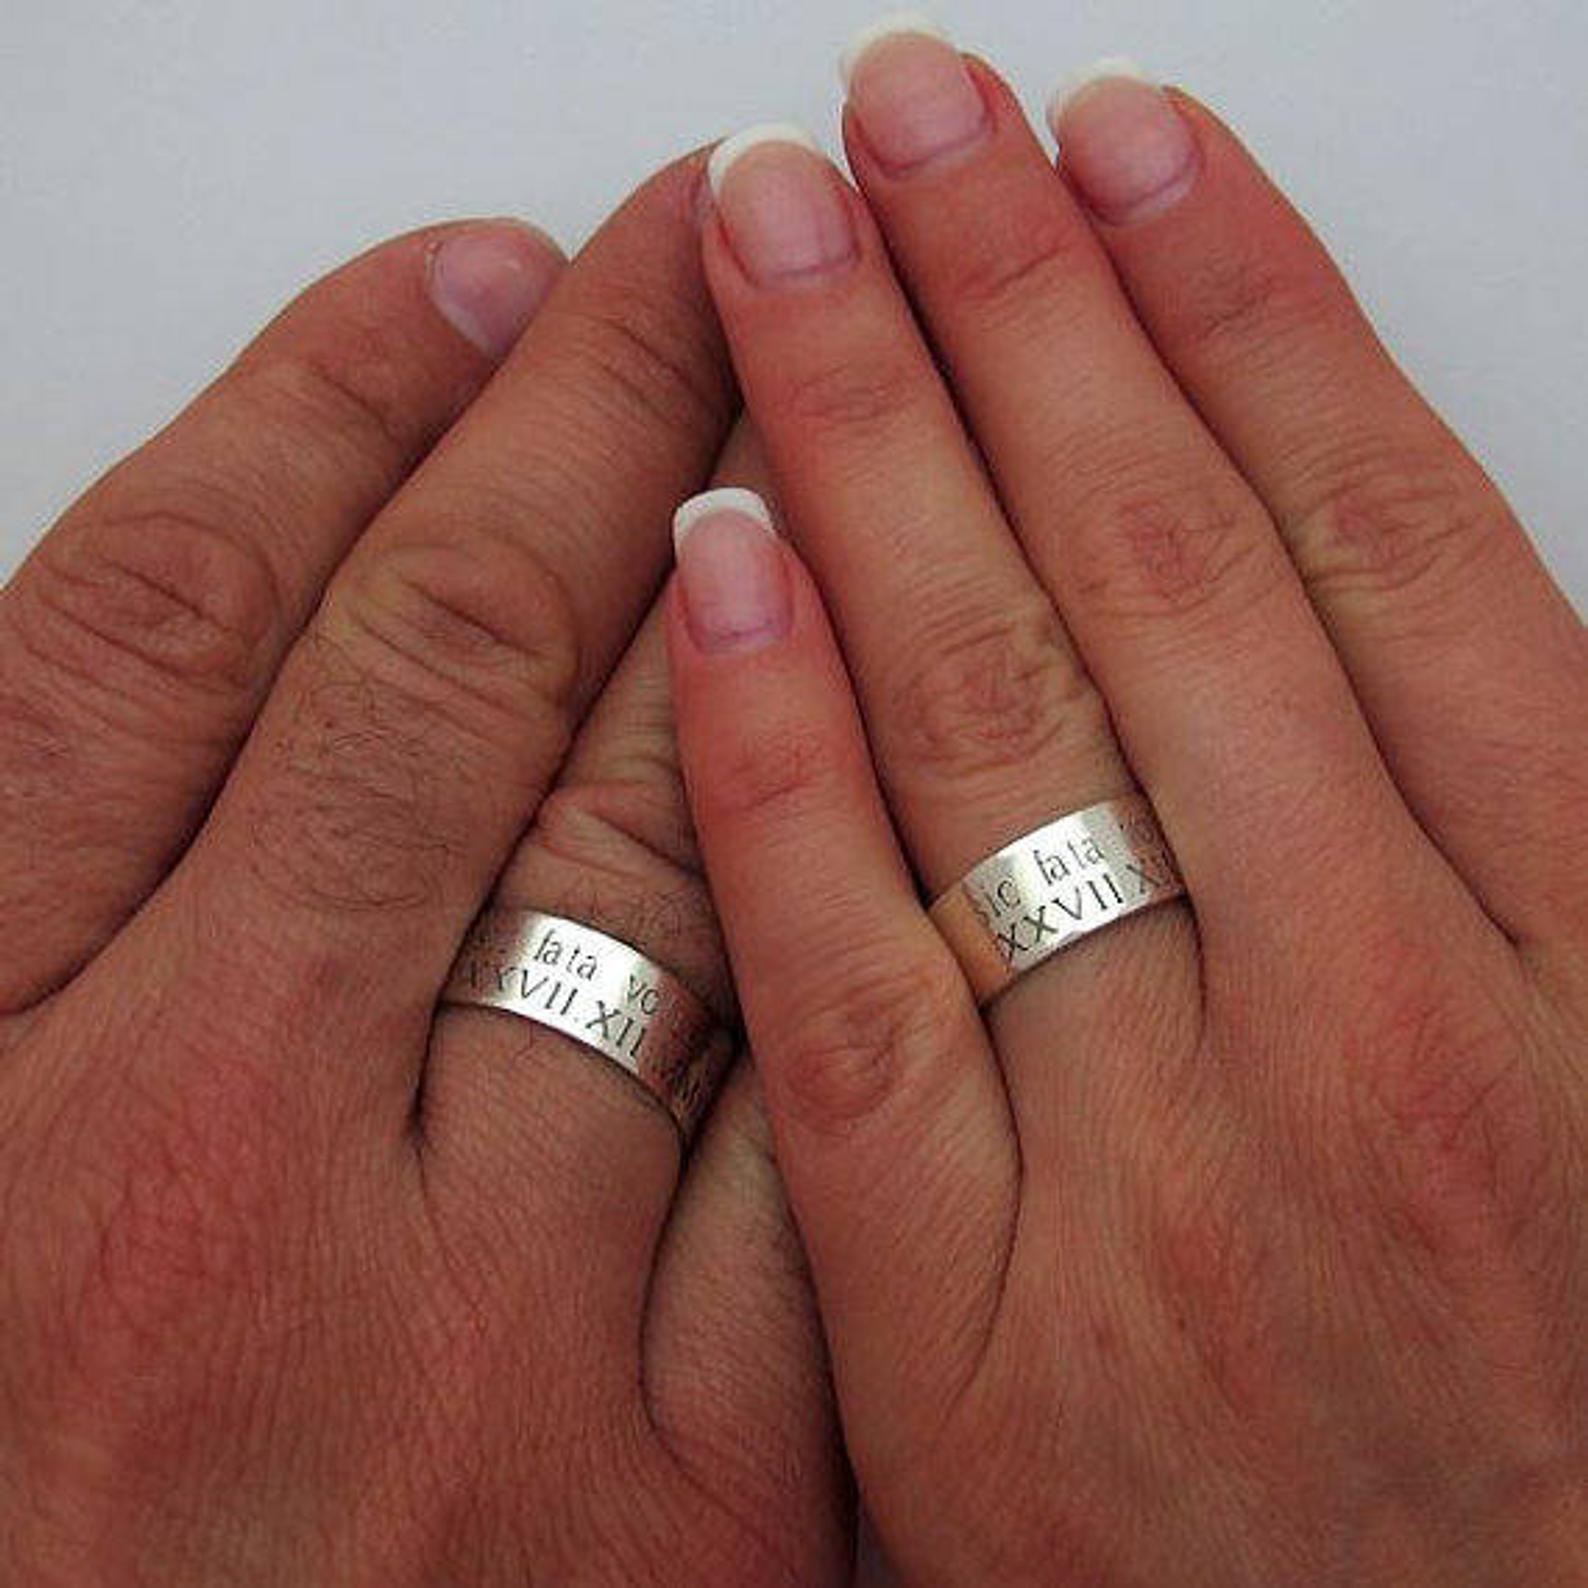 Roman Numeral Rings - How to Create a Roman Numeral Wedding Ring